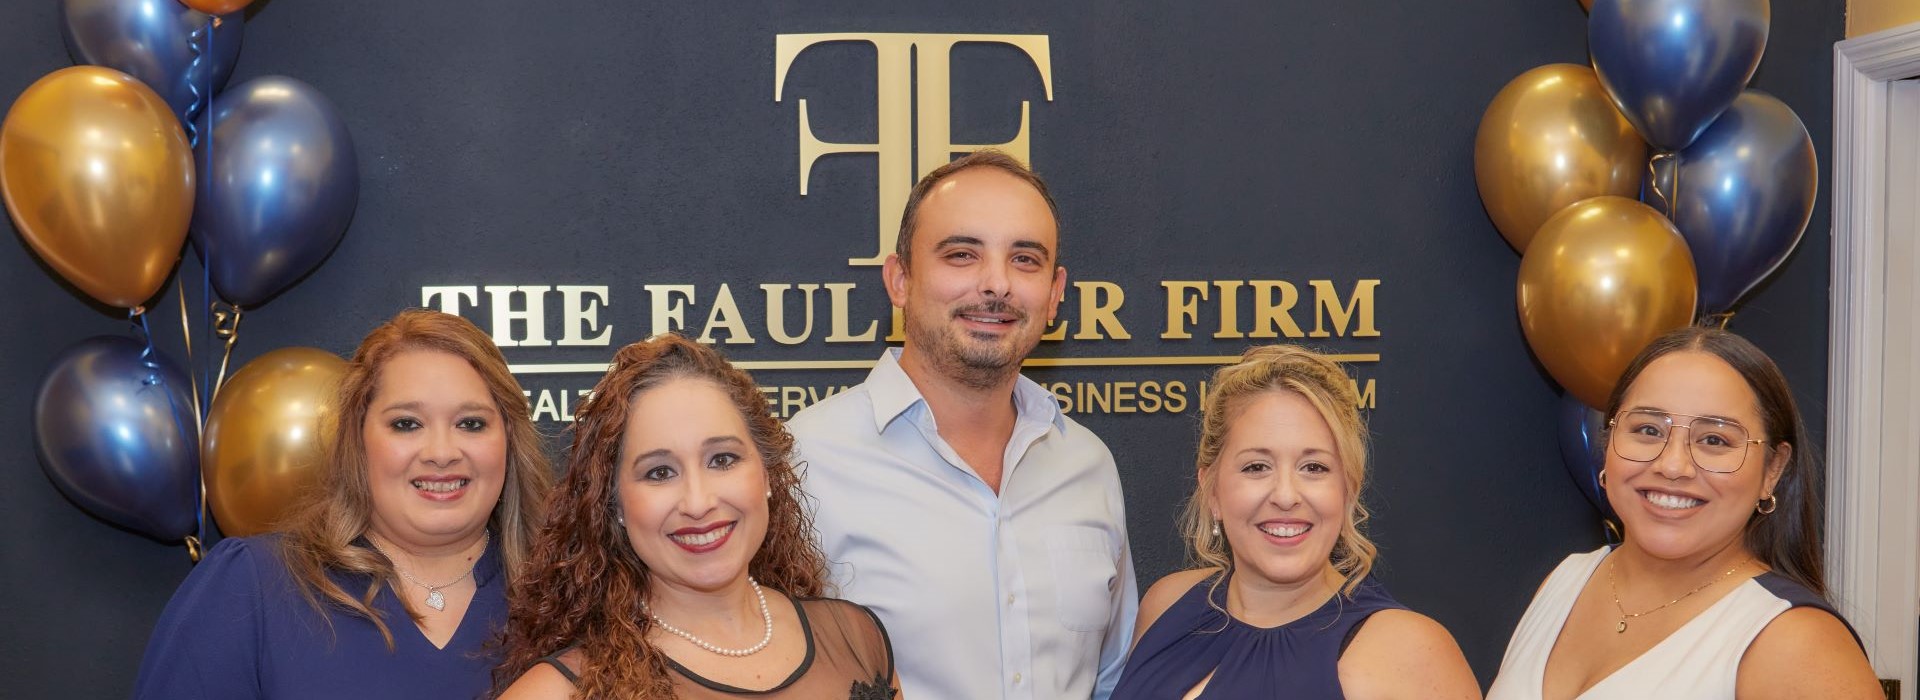 About Us - The Faulkner Firm